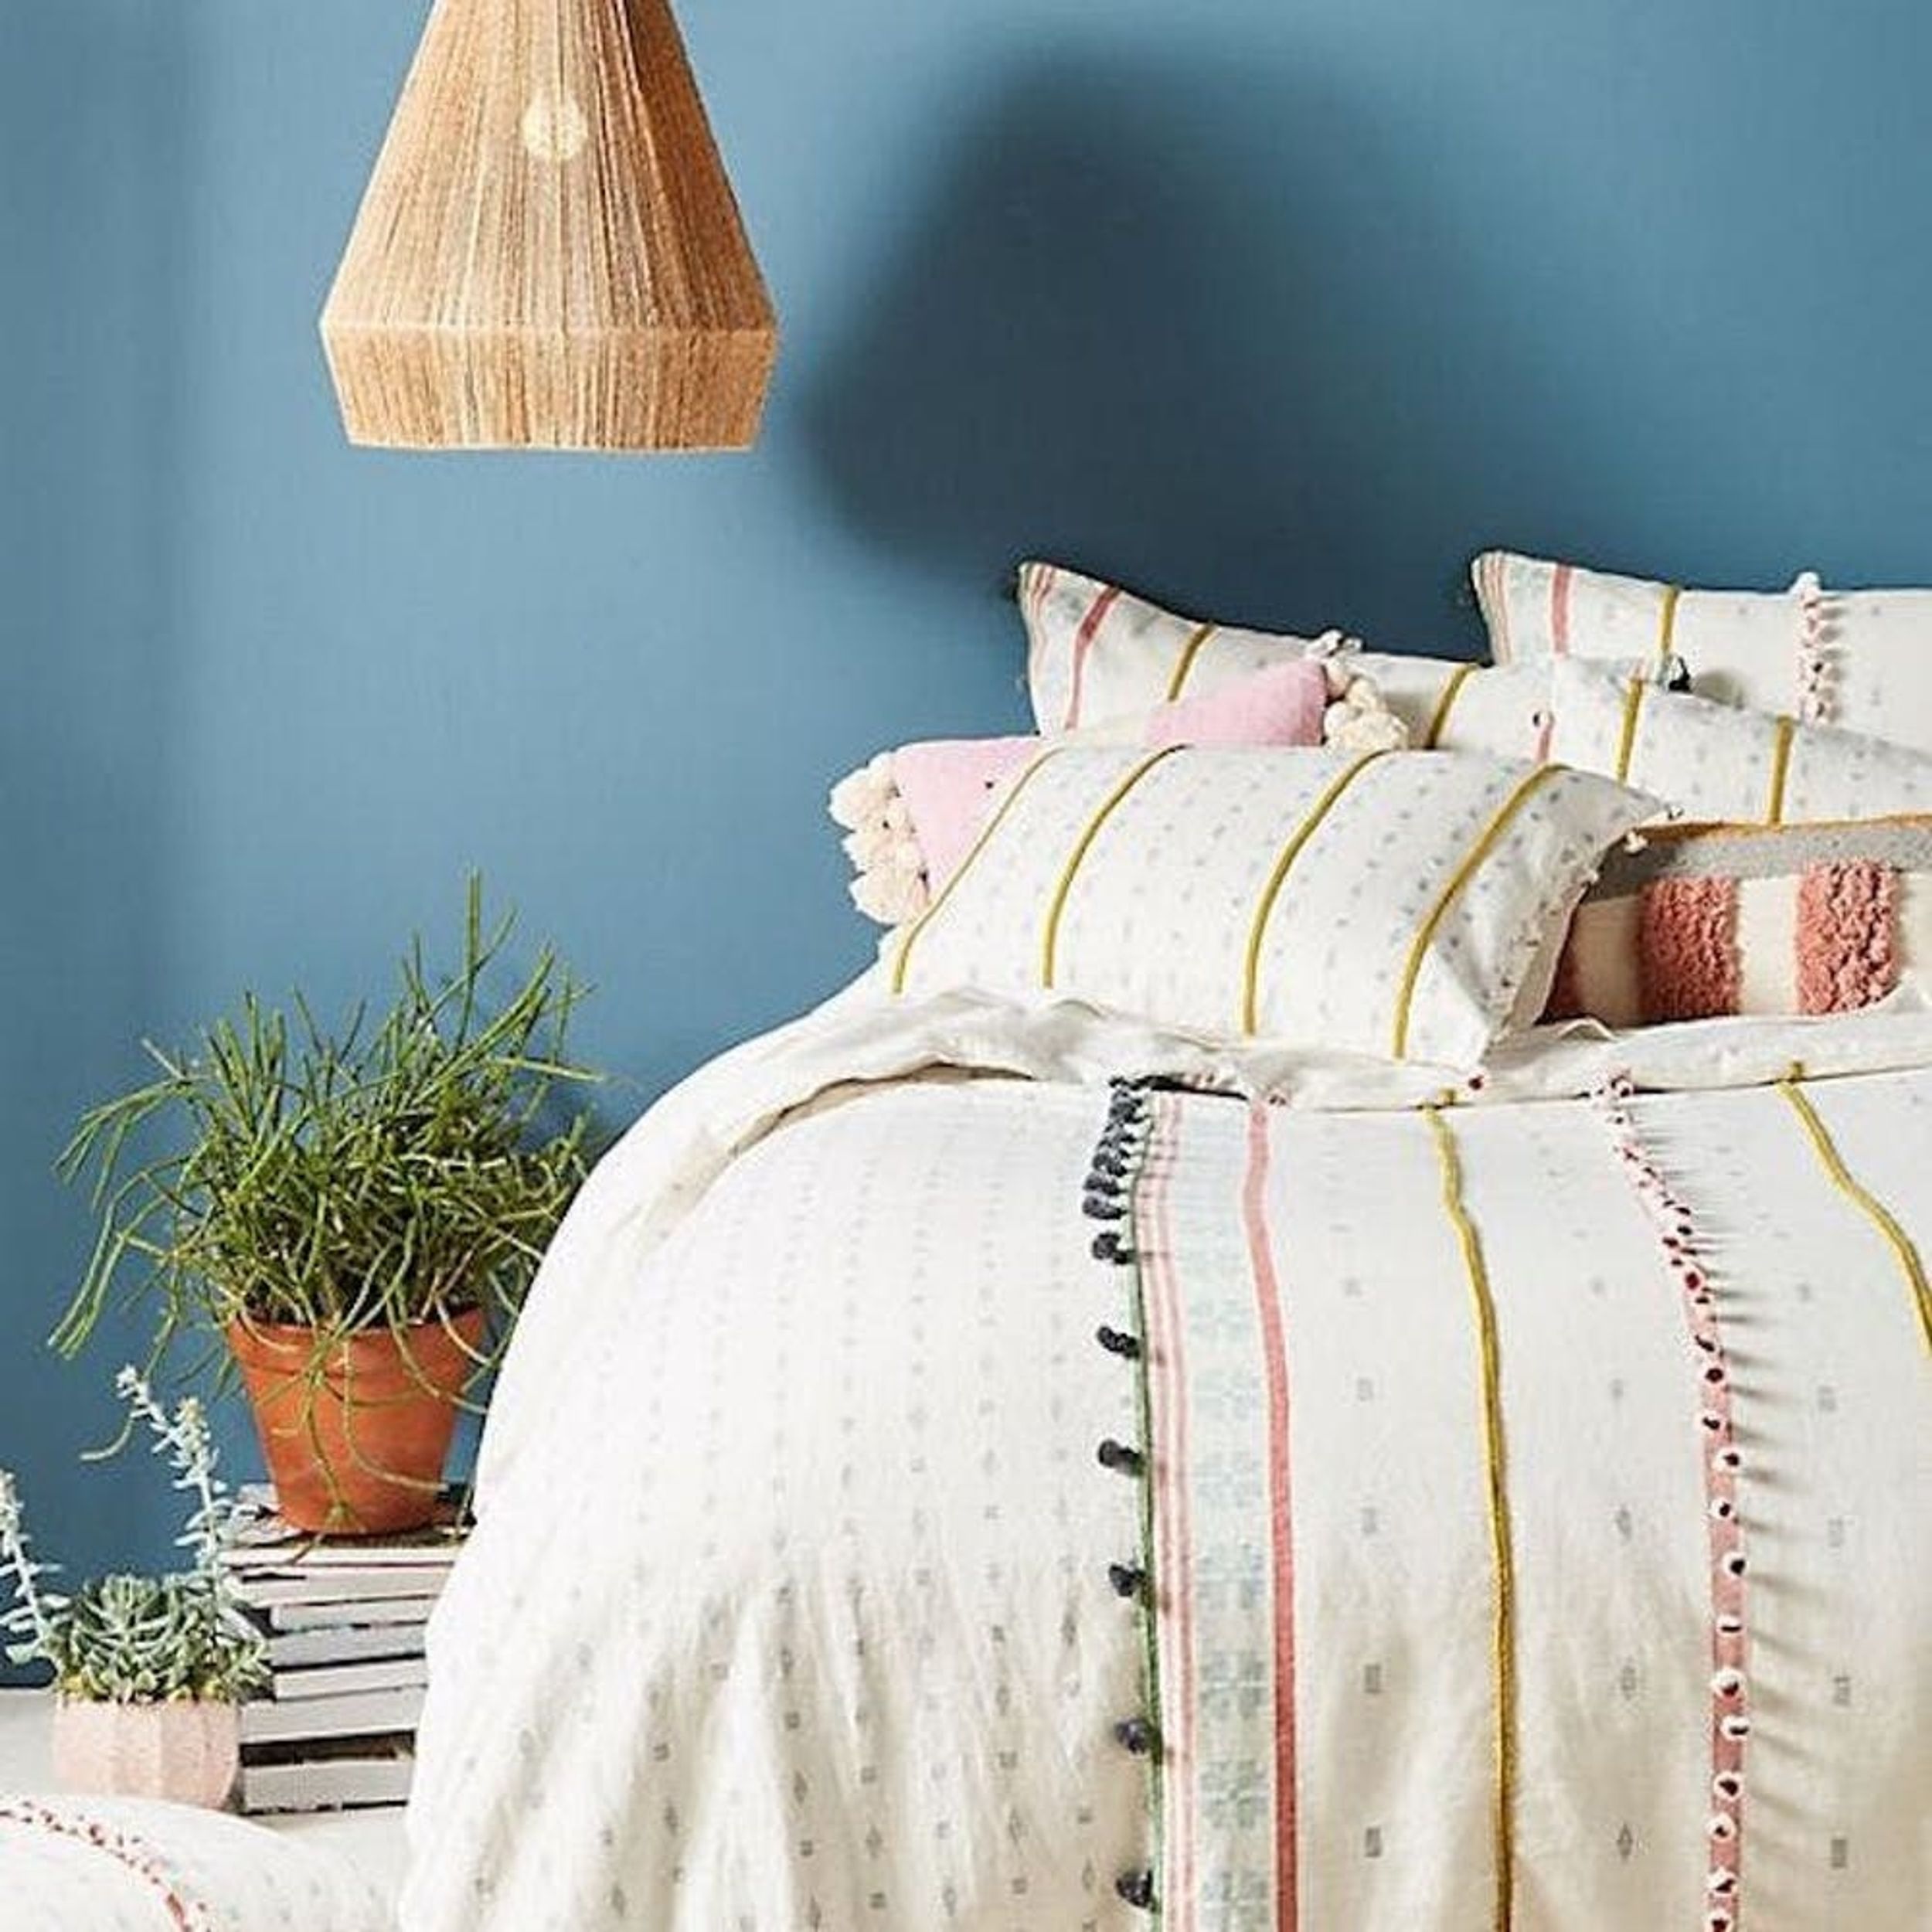 17 Home Decor Upgrades from Your First Apartment